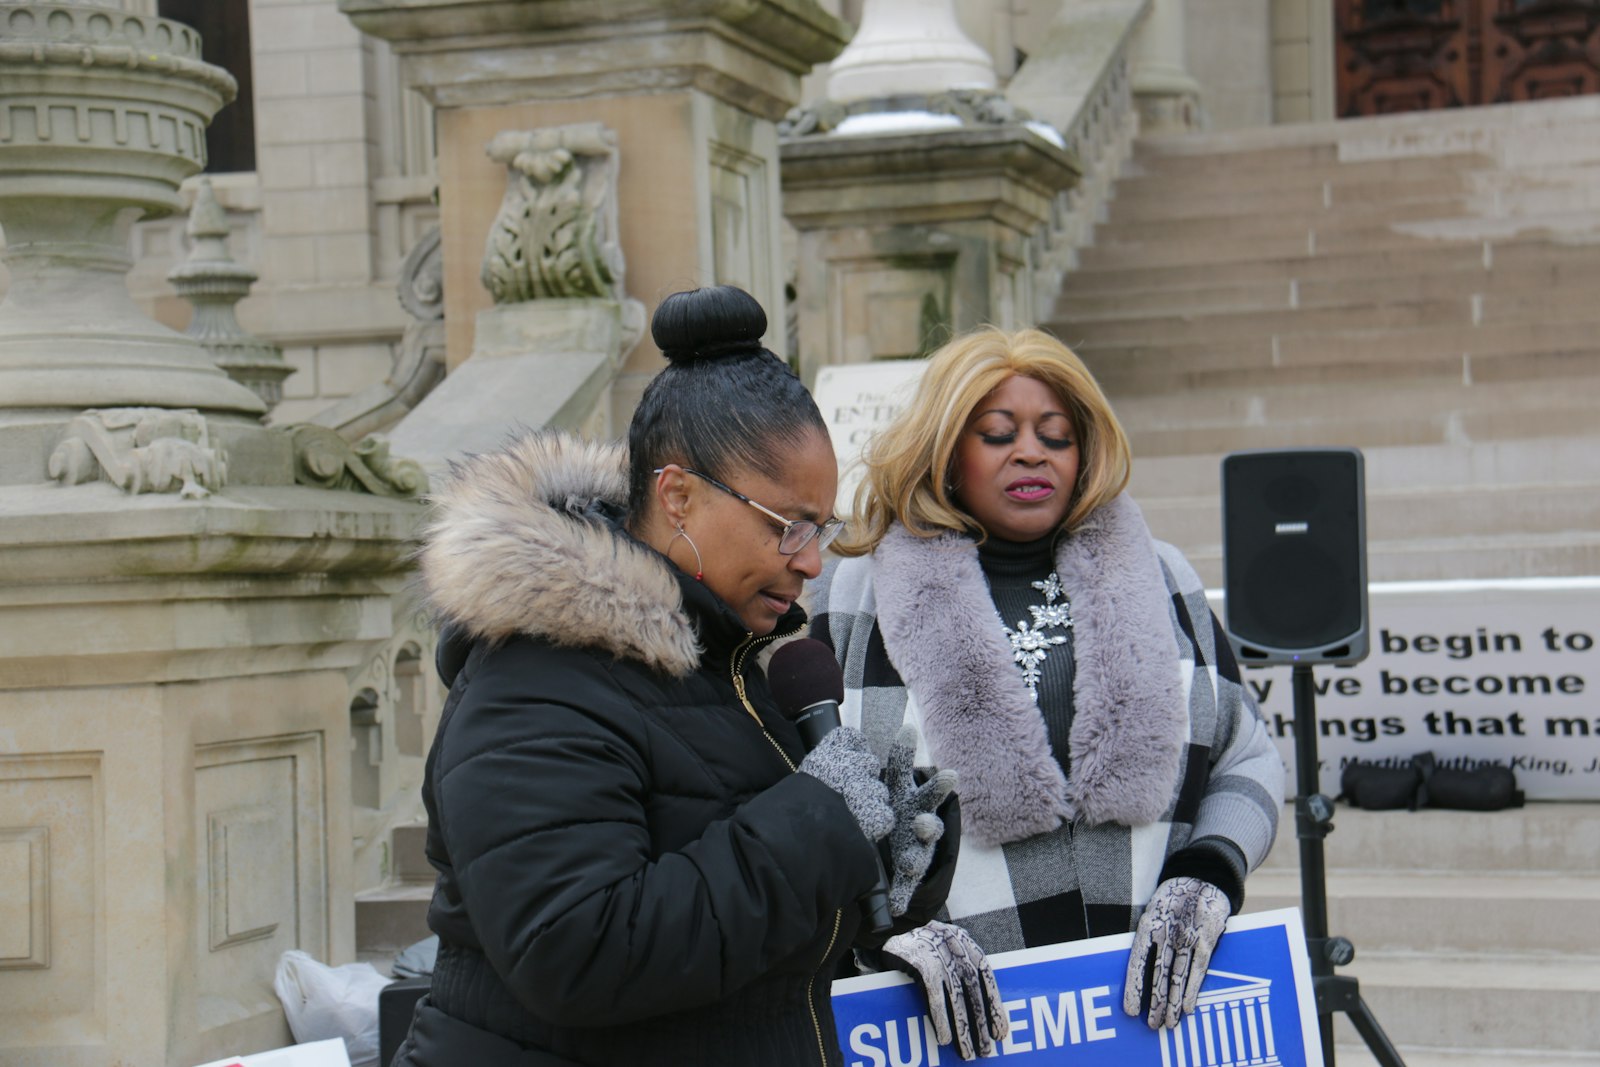 Monica Galloway of Flint and She Leads Michigan, along with Linda Lee Tarver of Lansing, and also She Leads Michigan, speak during a pray rally before the Michigan Capitol.